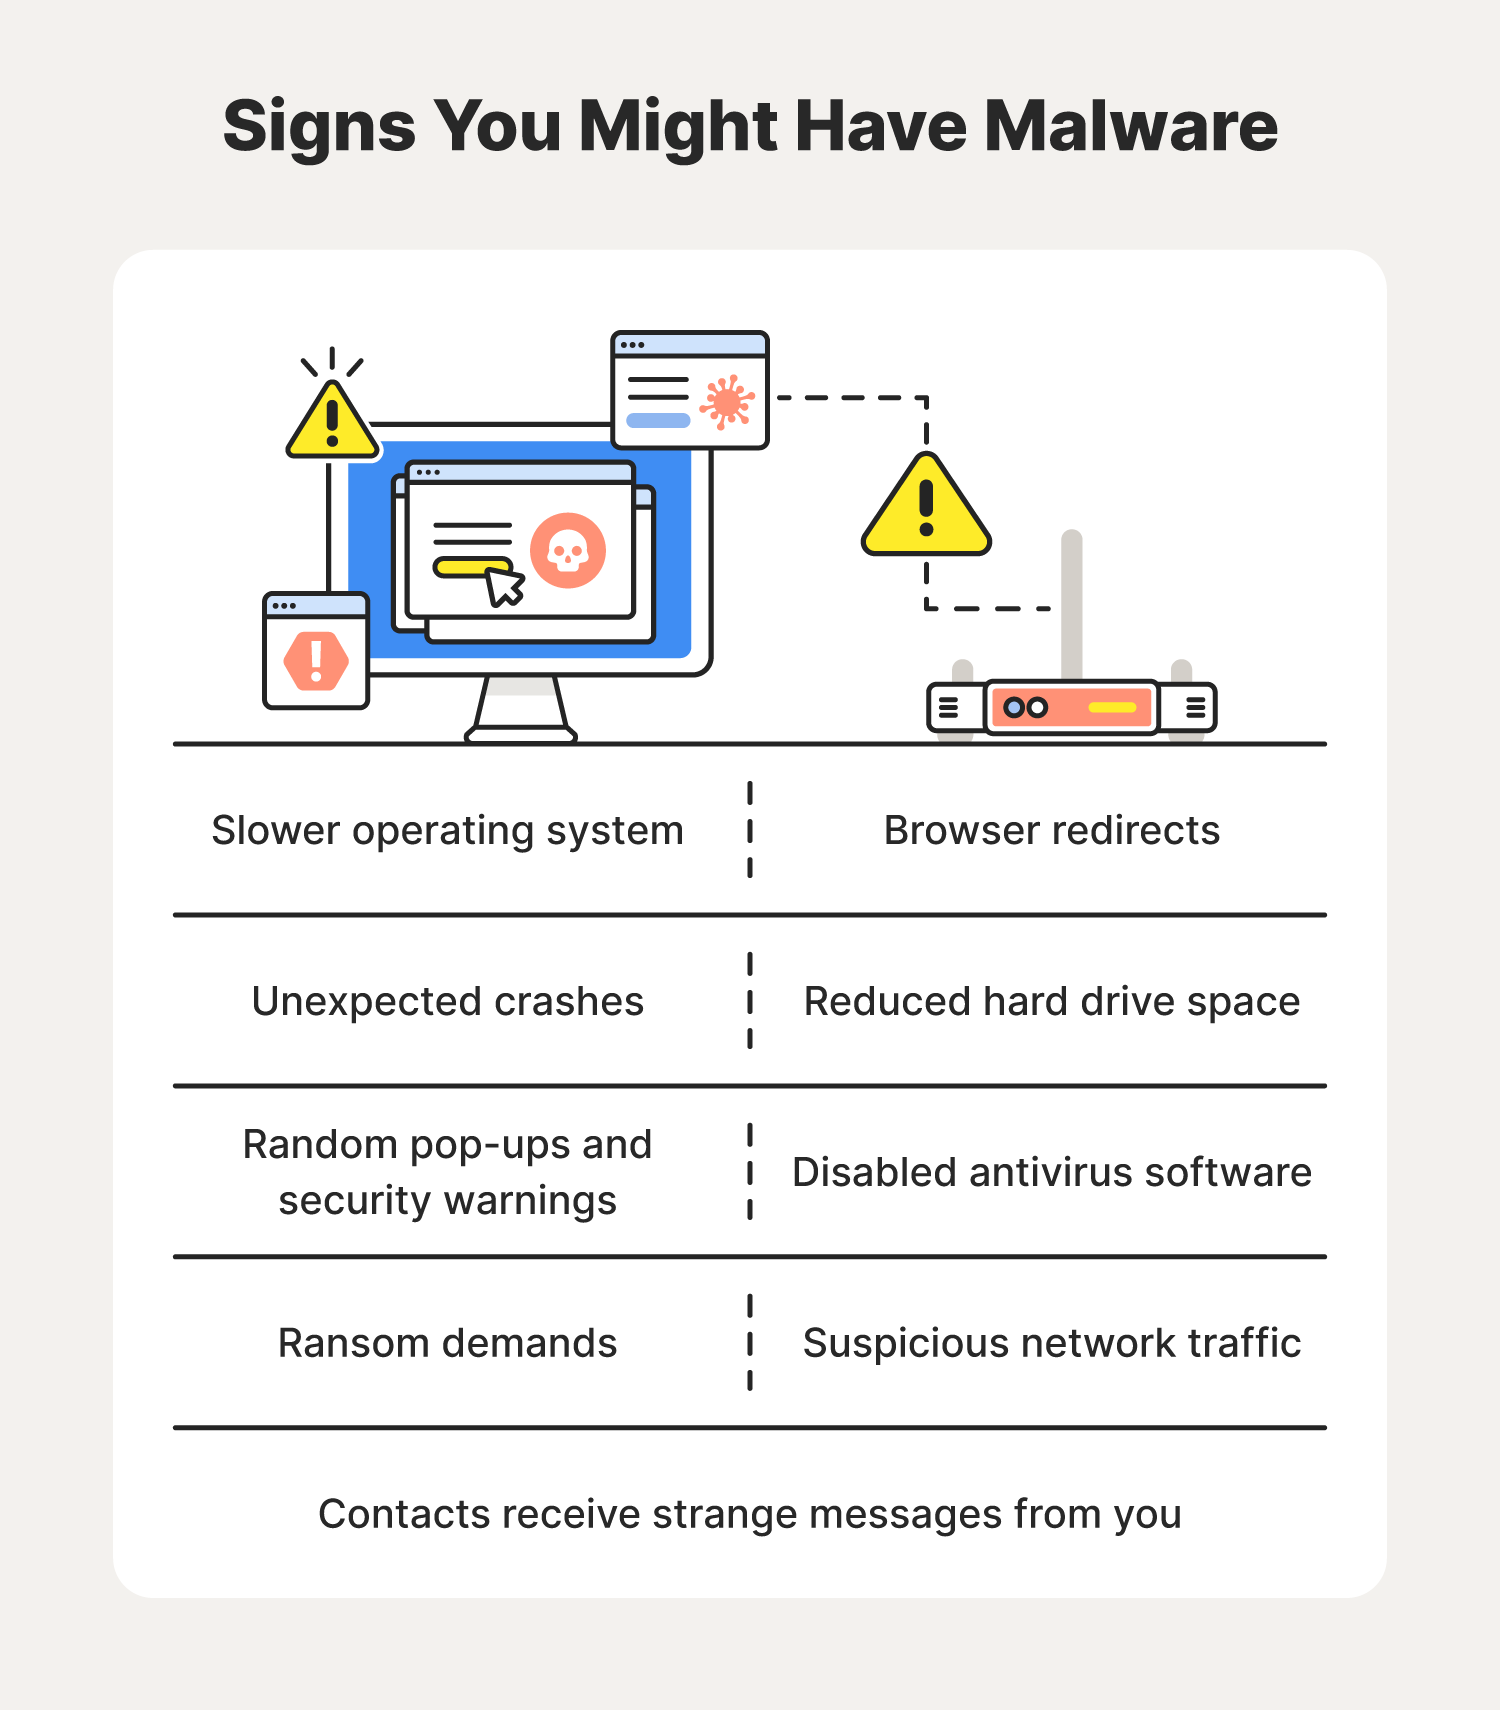 Illustrated chart featuring 8 signs that you may have malware on your device.